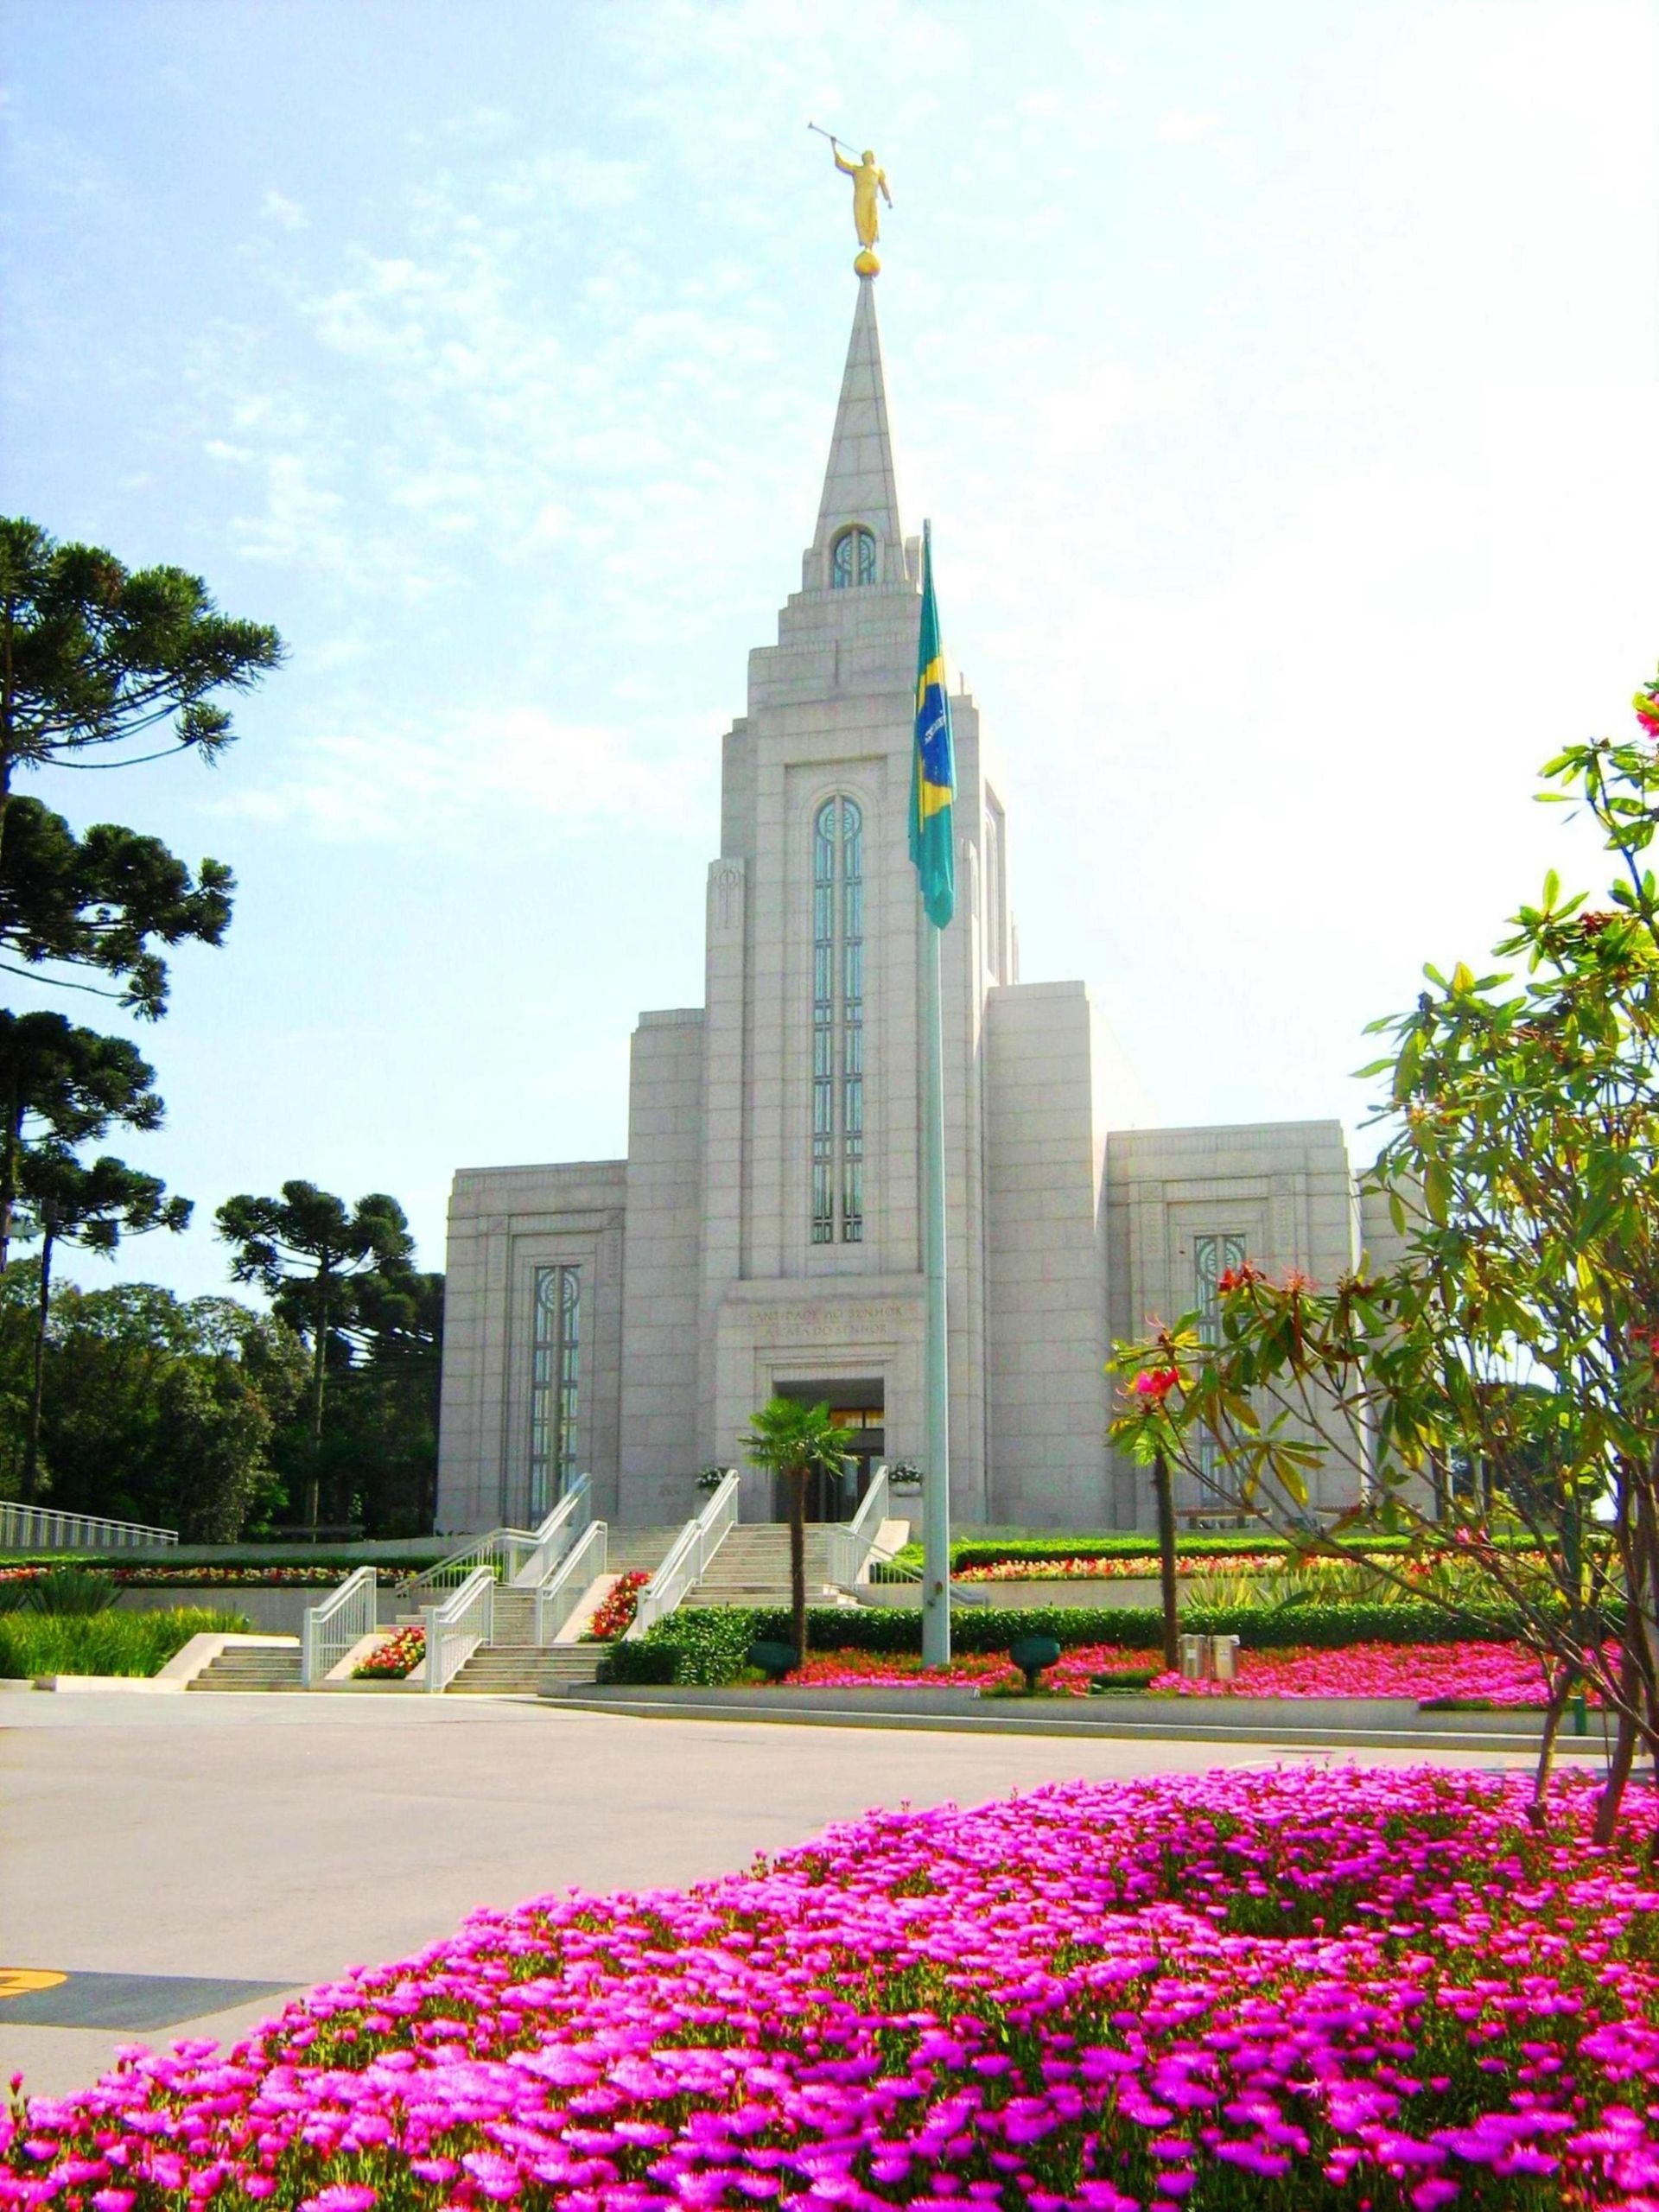 A front view of the Curitiba Brazil Temple and temple grounds.